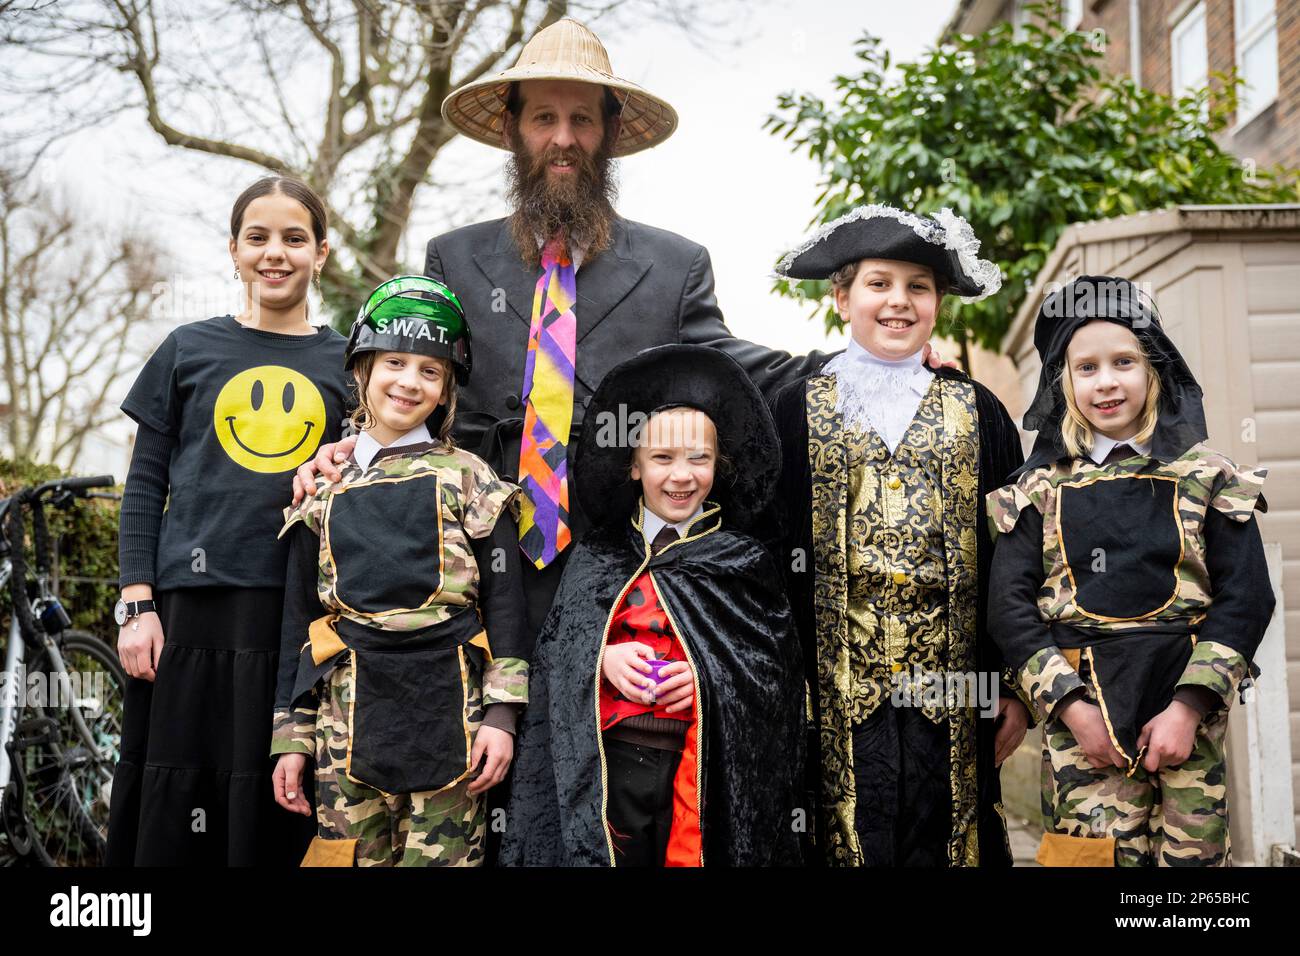 London, UK.  7 March 2023. A father and children in Stamford Hill, north London, dressed in colourful costumes celebrate the Jewish festival of Purim. The festival involves the reading of the Book of Esther, describing the defeat of Haman, the Persian king's adviser, who plotted to massacre the Jewish people 2,500 years ago, but the event was prevented by Esther’s courage.  Credit: Stephen Chung / Alamy Live News Stock Photo